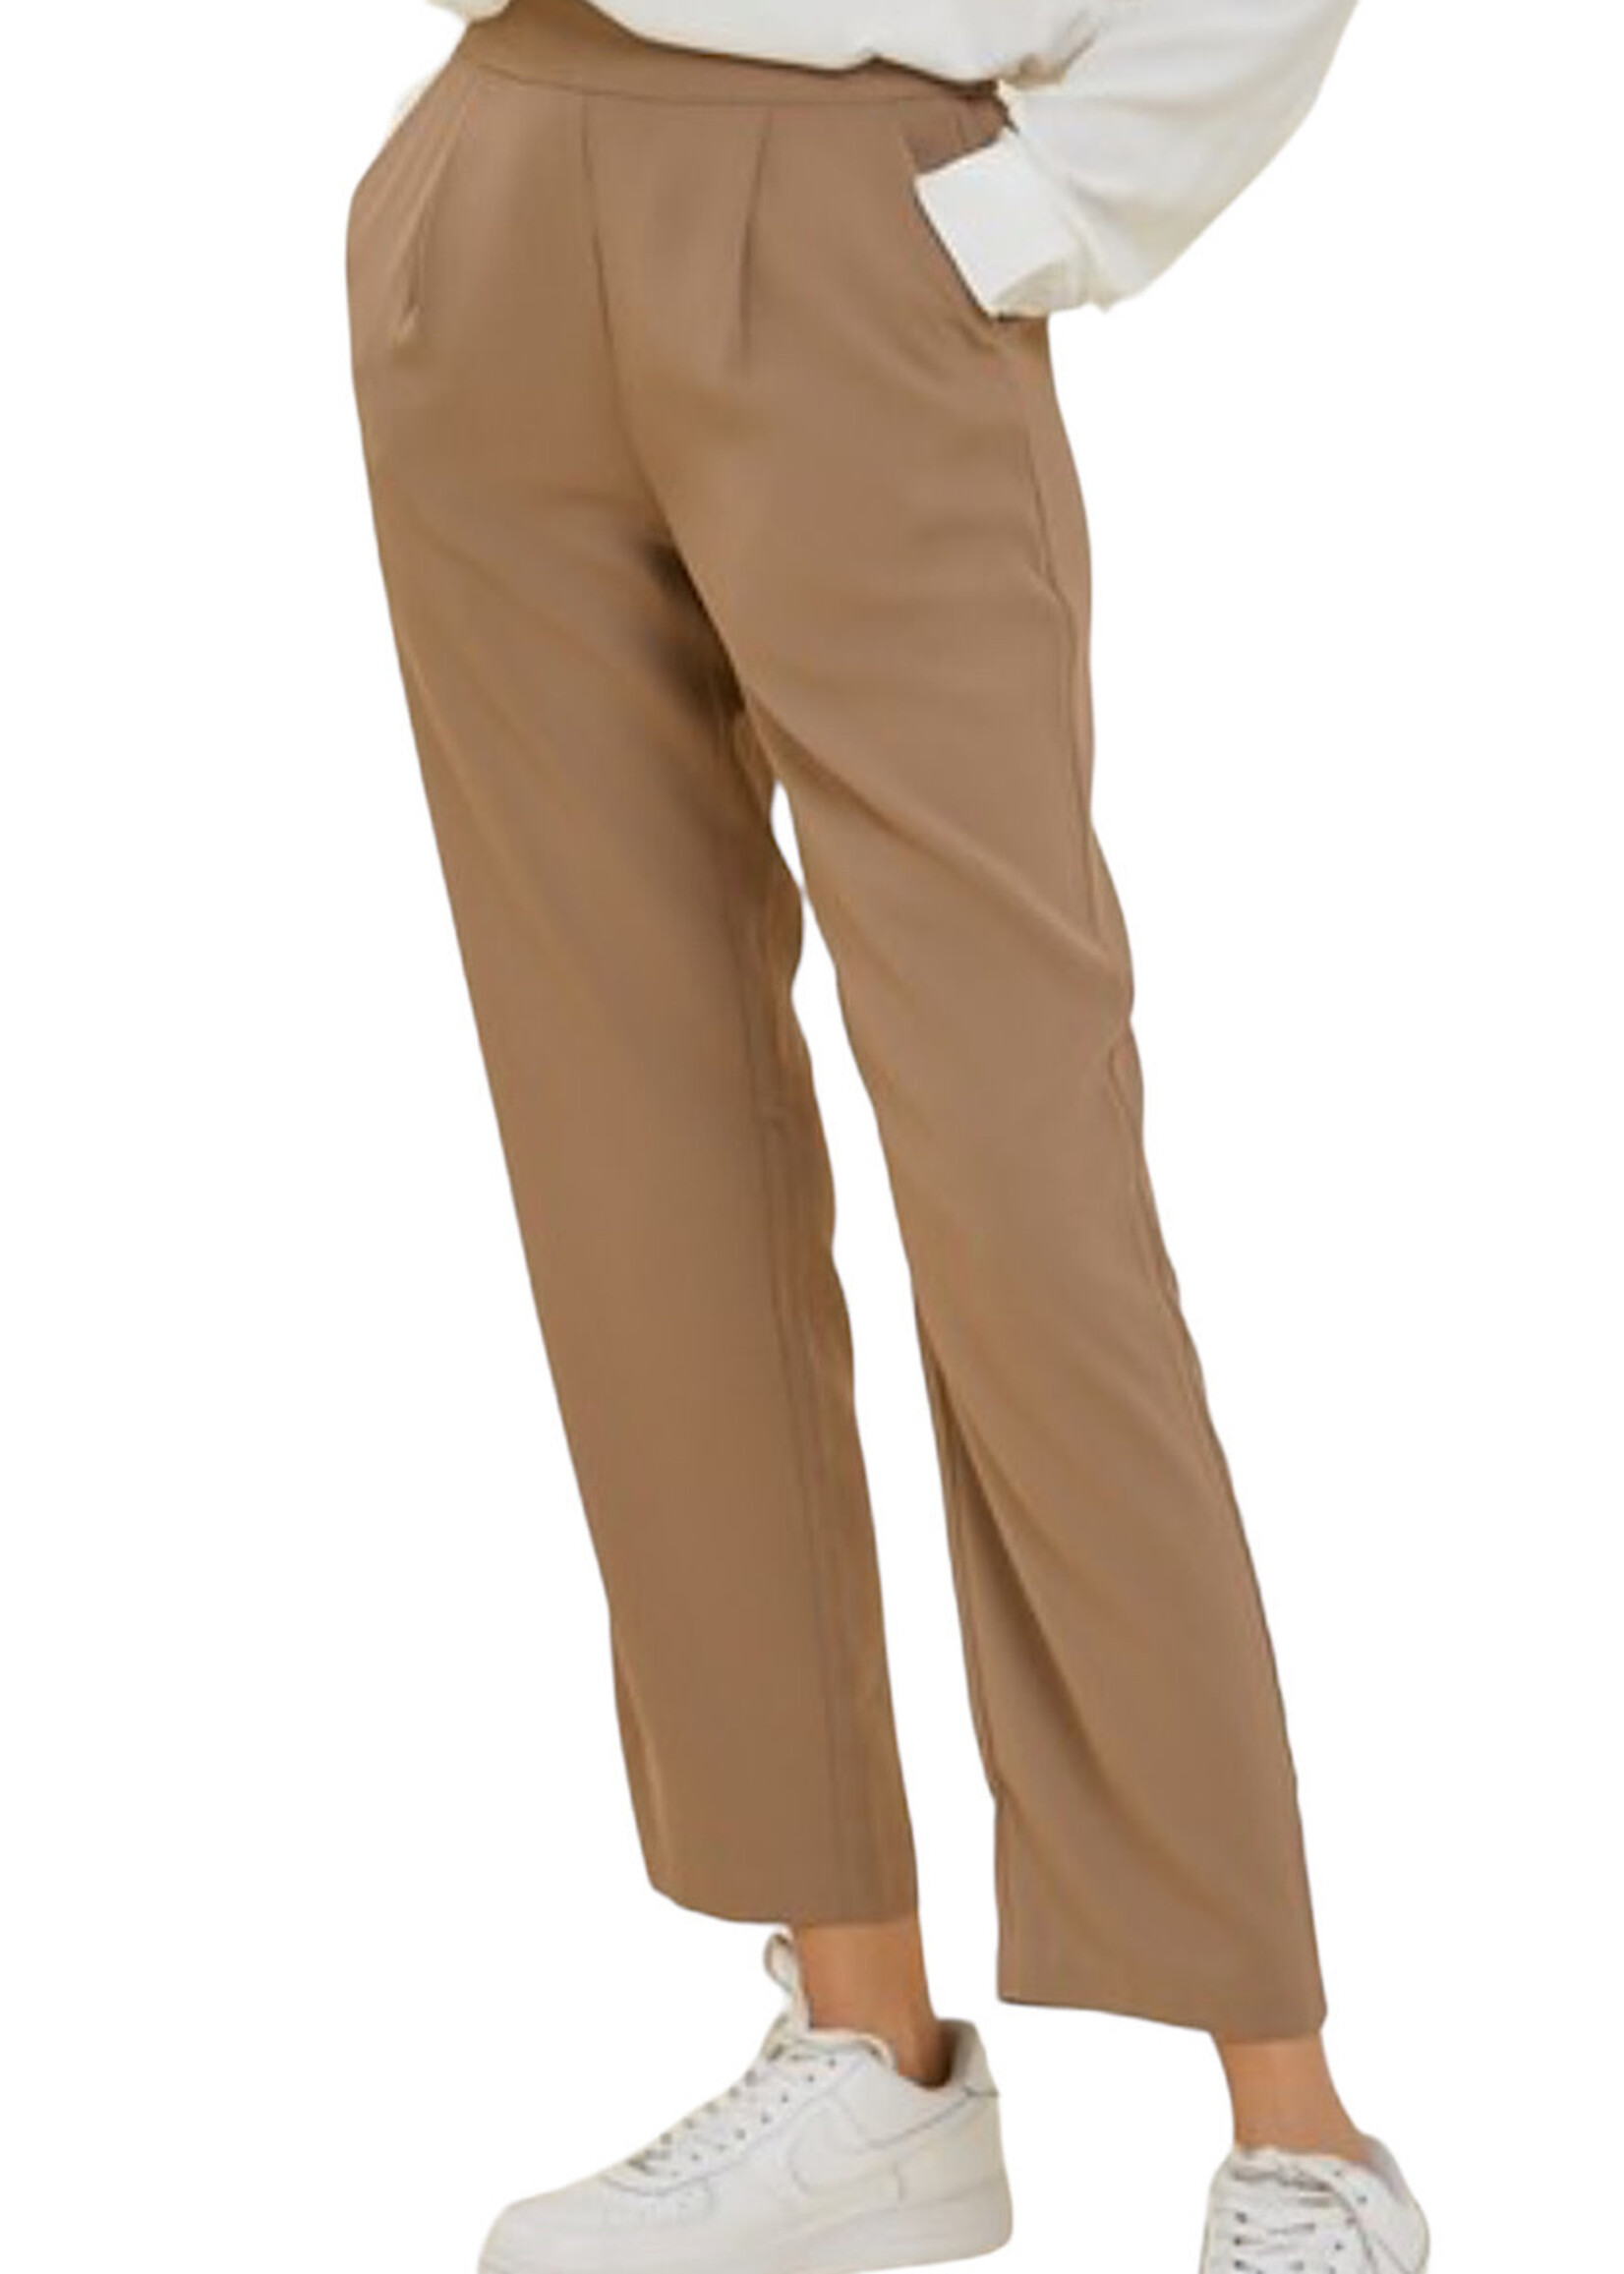 Mocha Mid Rise Pant with Elastic Waist and Side Pockets